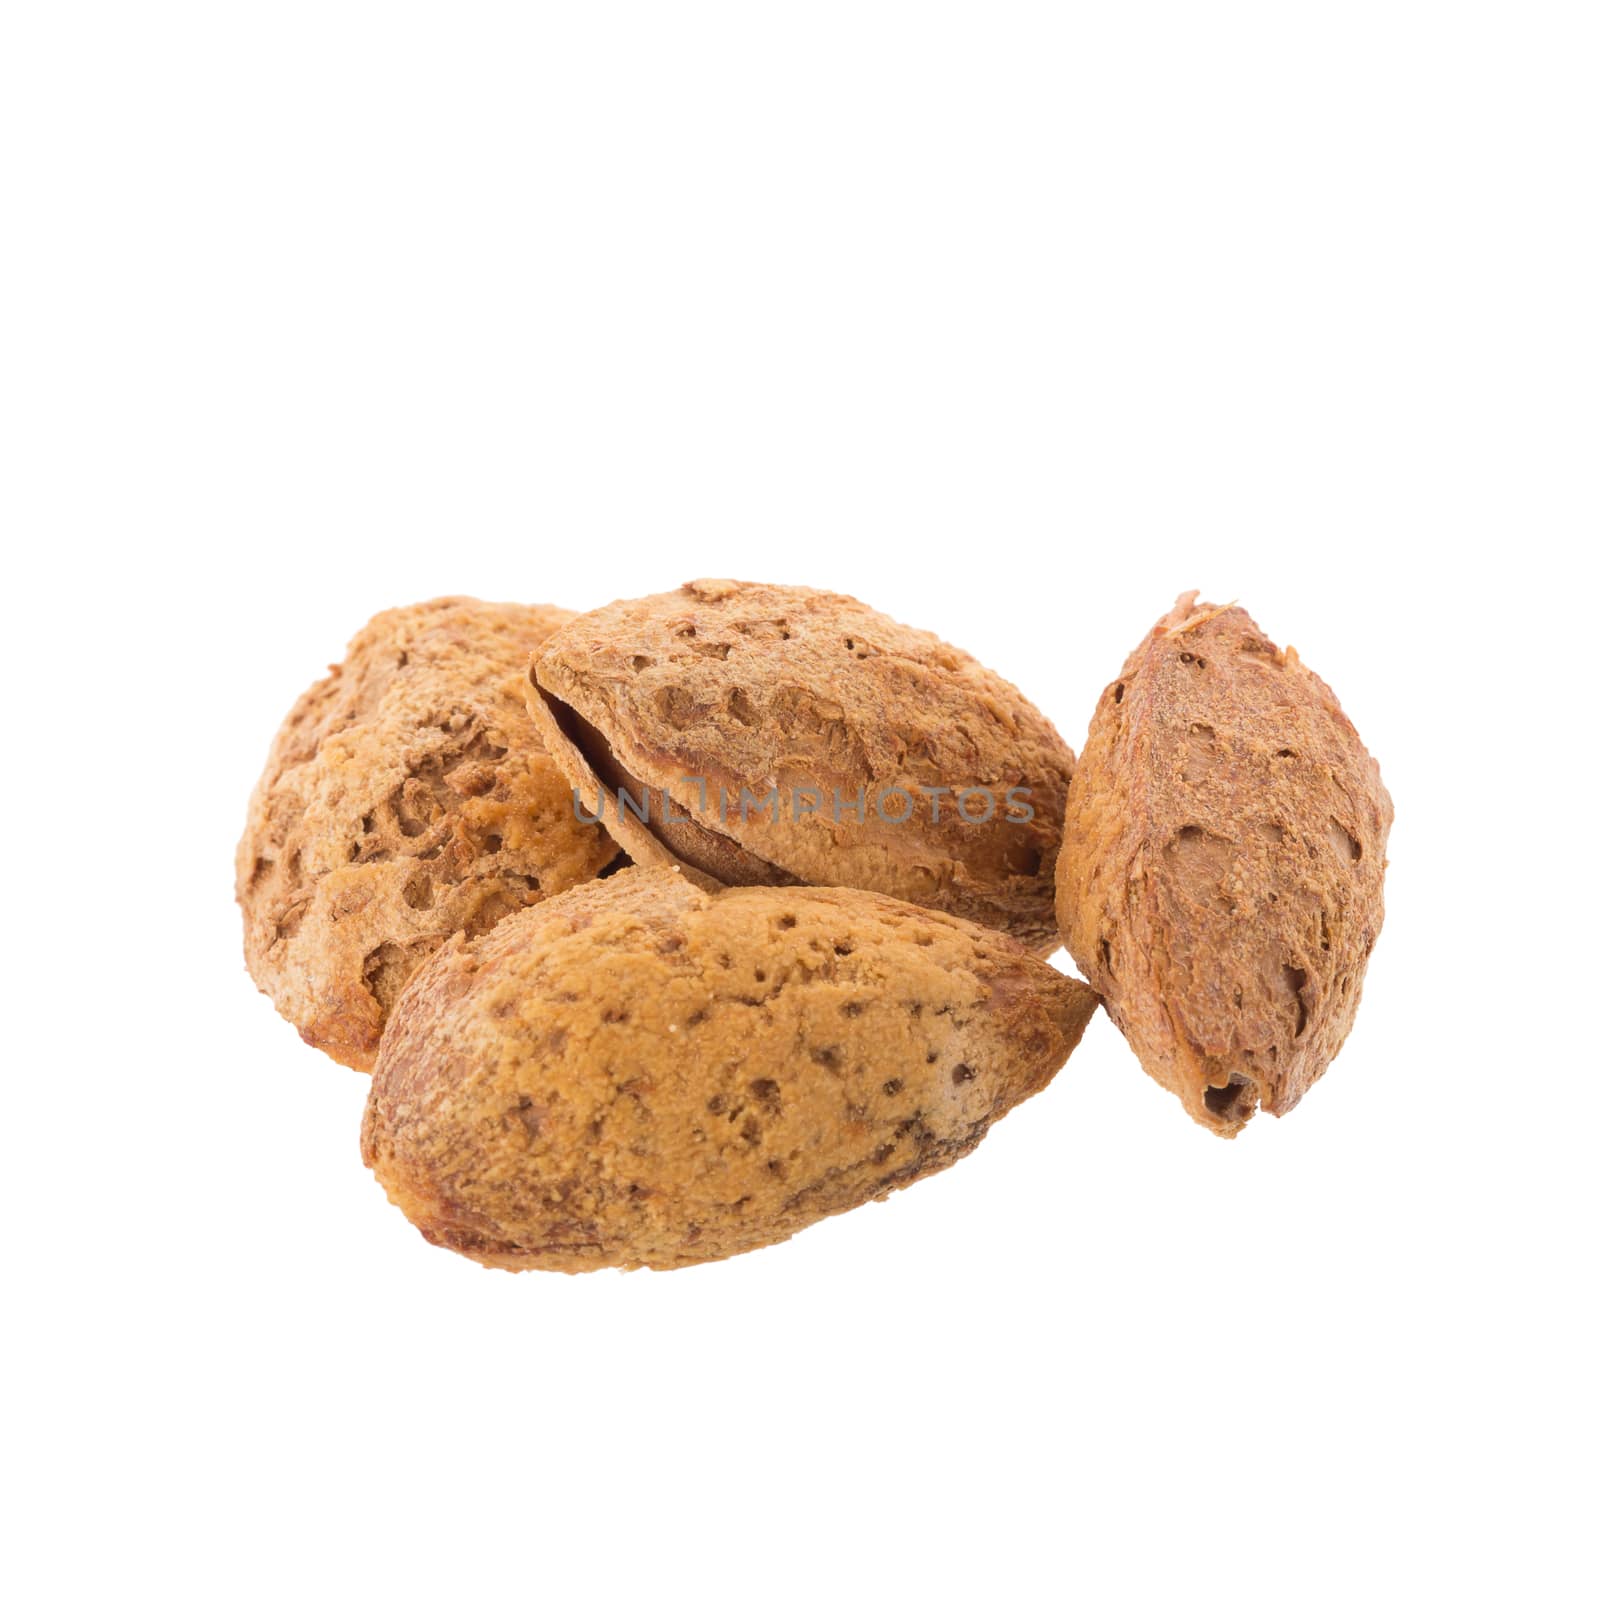 Almond nut in shell isolated on white background by kaiskynet